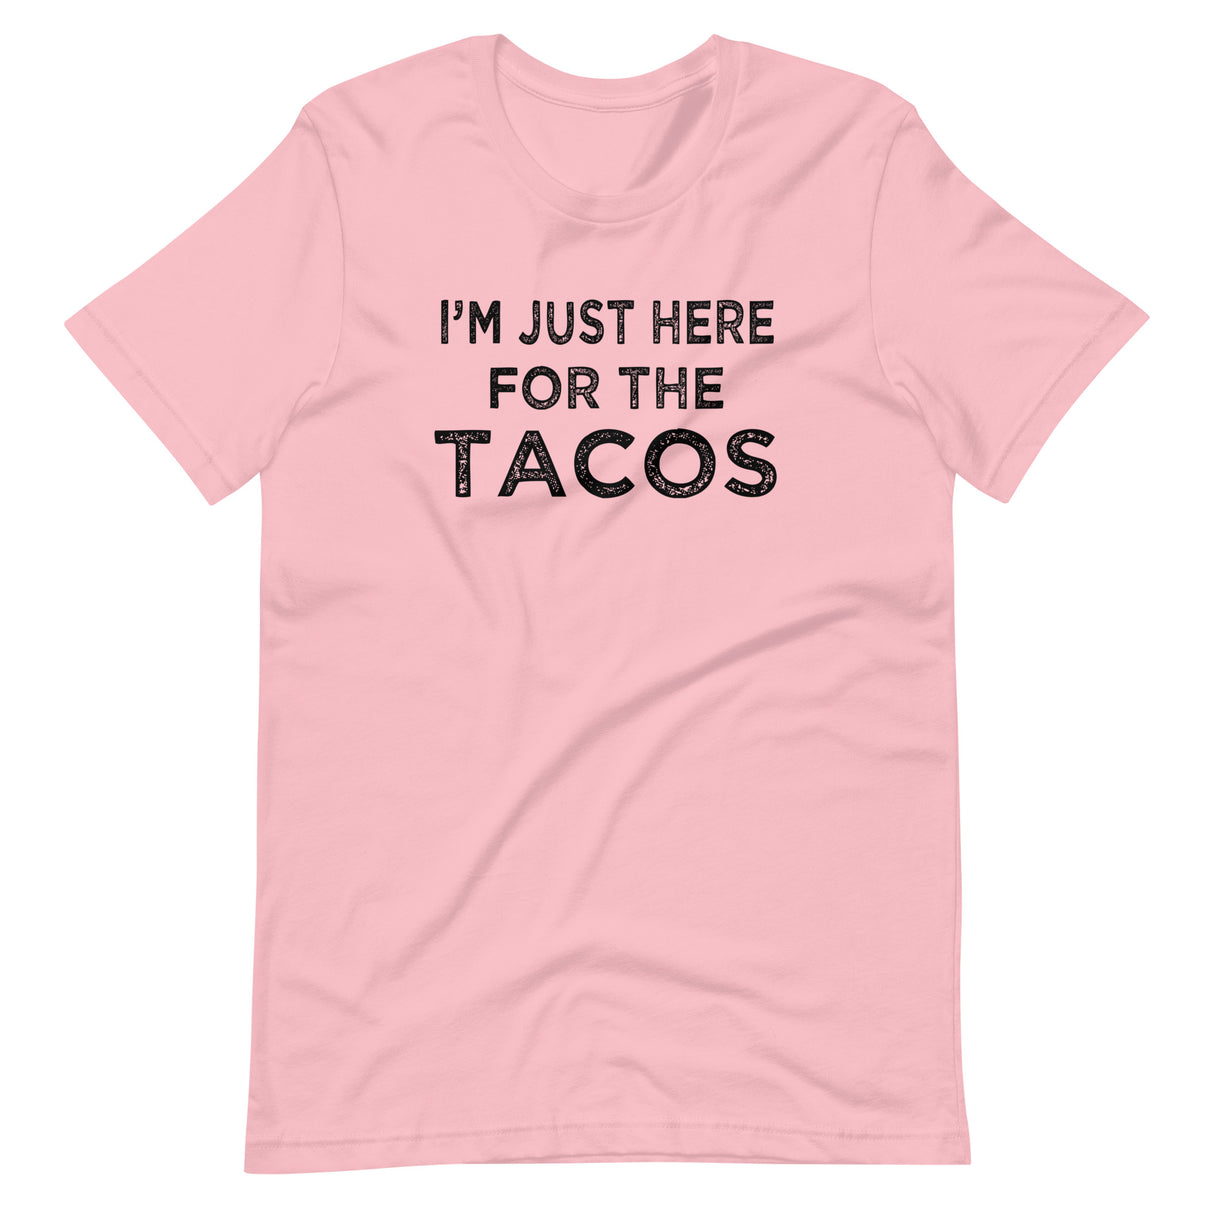 I'm Just Here For The Tacos Shirt